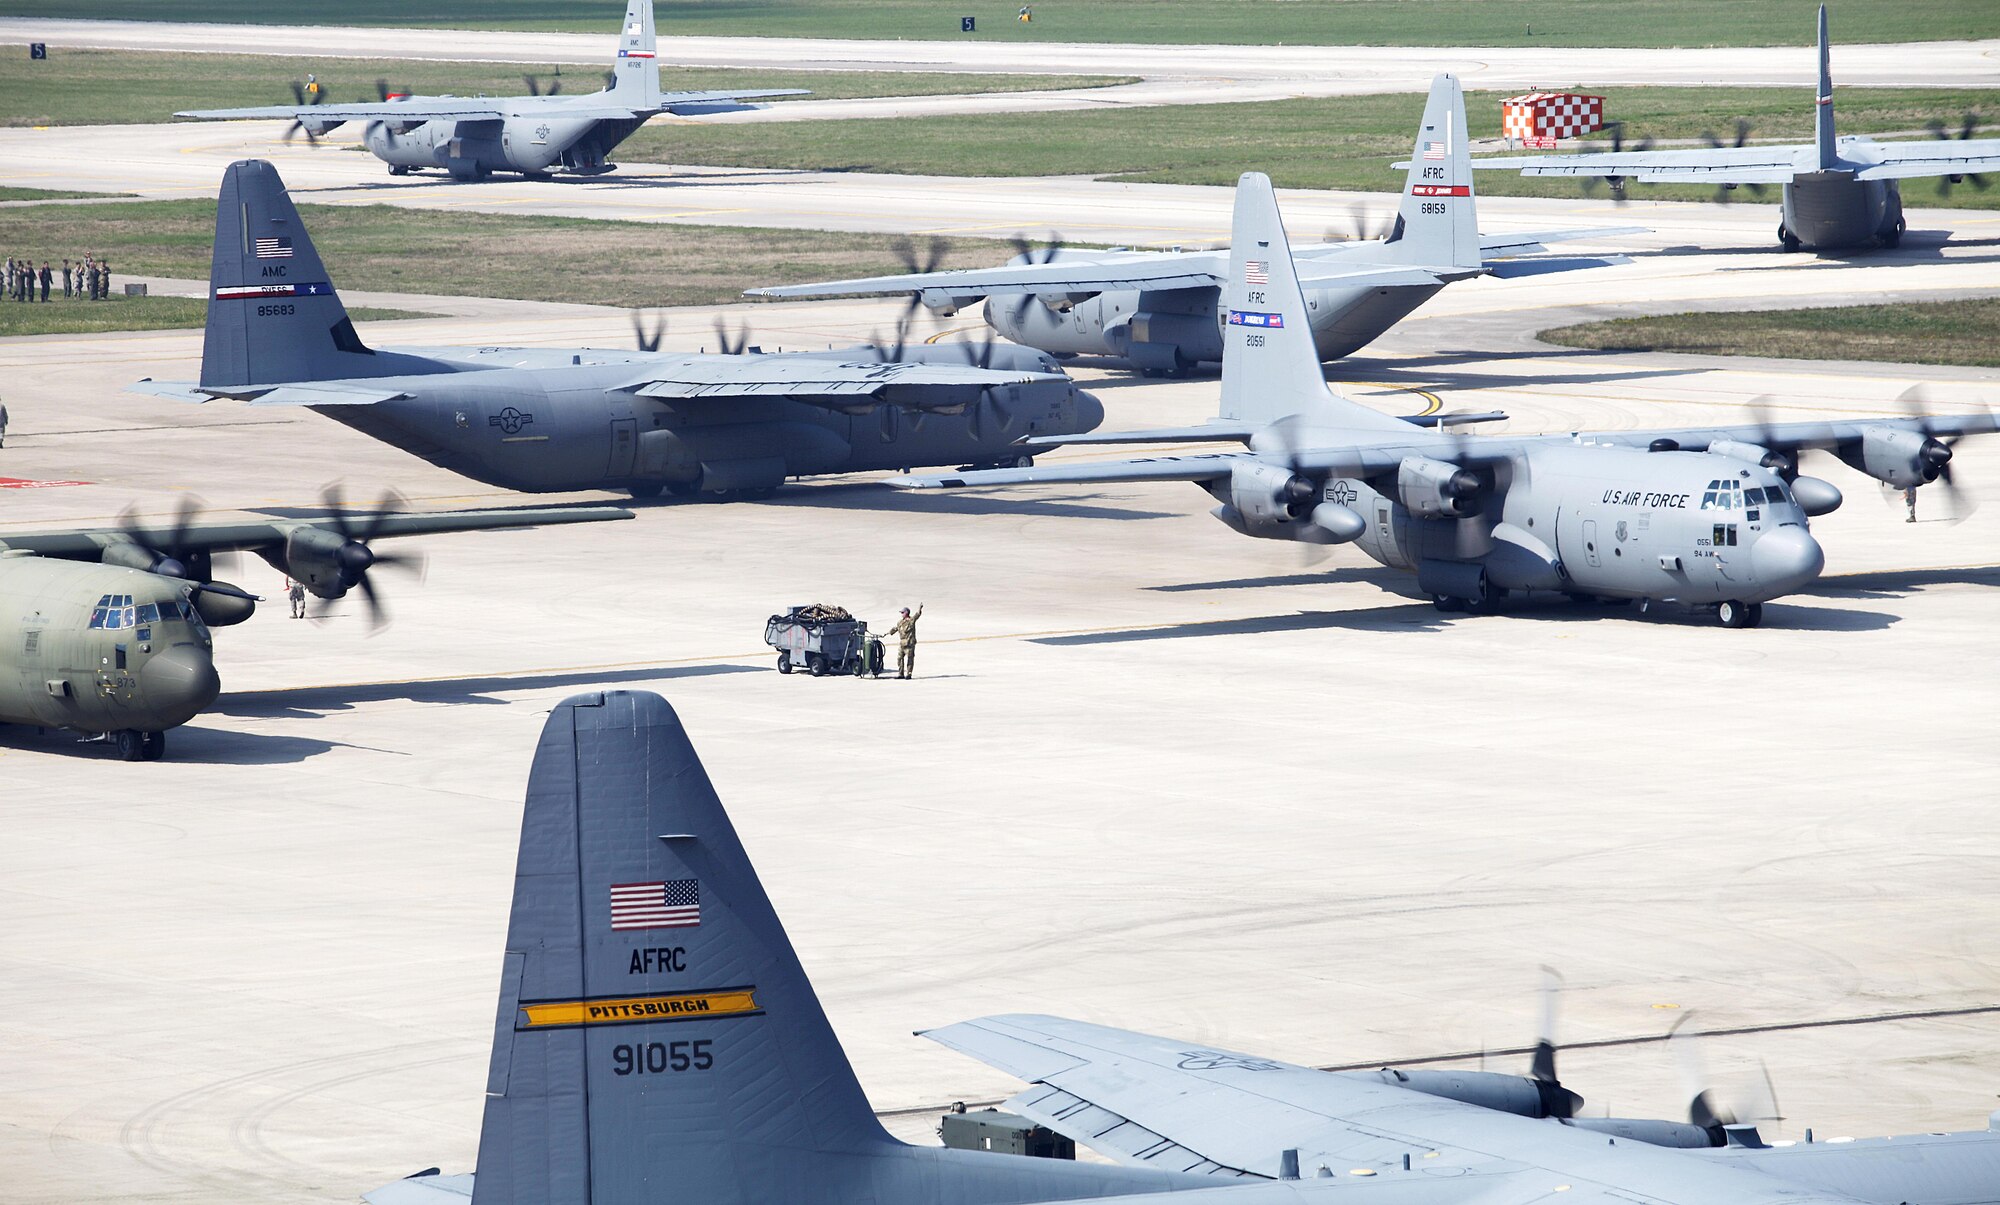 An 815th Airlift Squadron C-130J Super Hercules and other C-130s filled with soldiers from the U.S. Army 173rd Airborne Brigade line up at Aviano Air Base, Italy, to depart for Saber Junction 16, April 12, 2016. Paratroopers from the 173rd Airborne Brigade were off to Hohenfels, Germany for a combined operation with participating Allied and partner nations. (U.S. Army photo/Katie Currid)